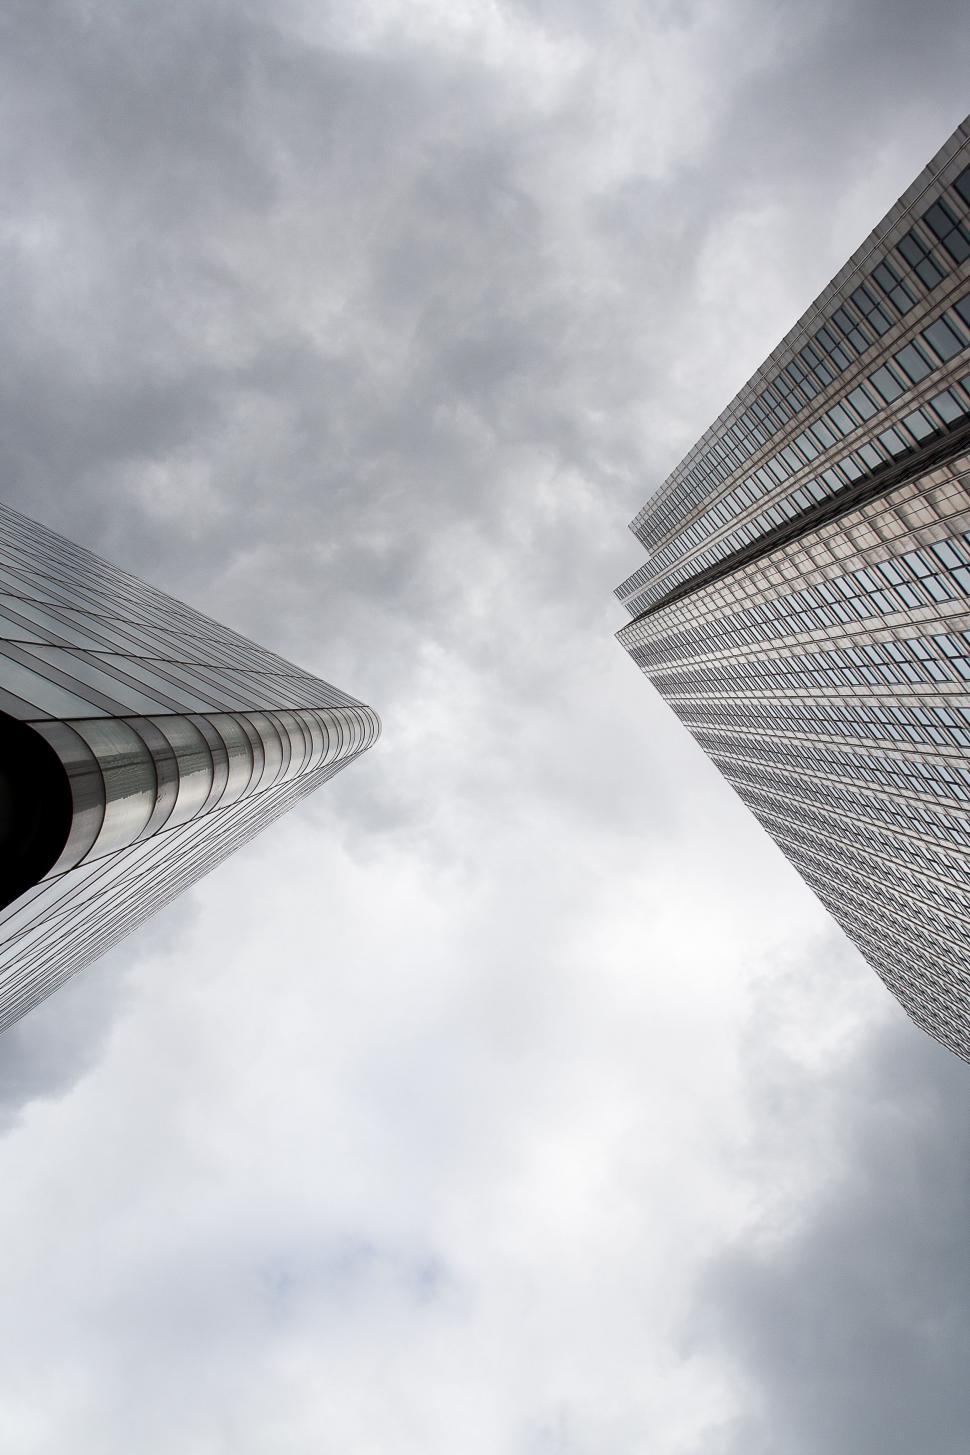 Free Image of Two Tall Buildings Standing Together 